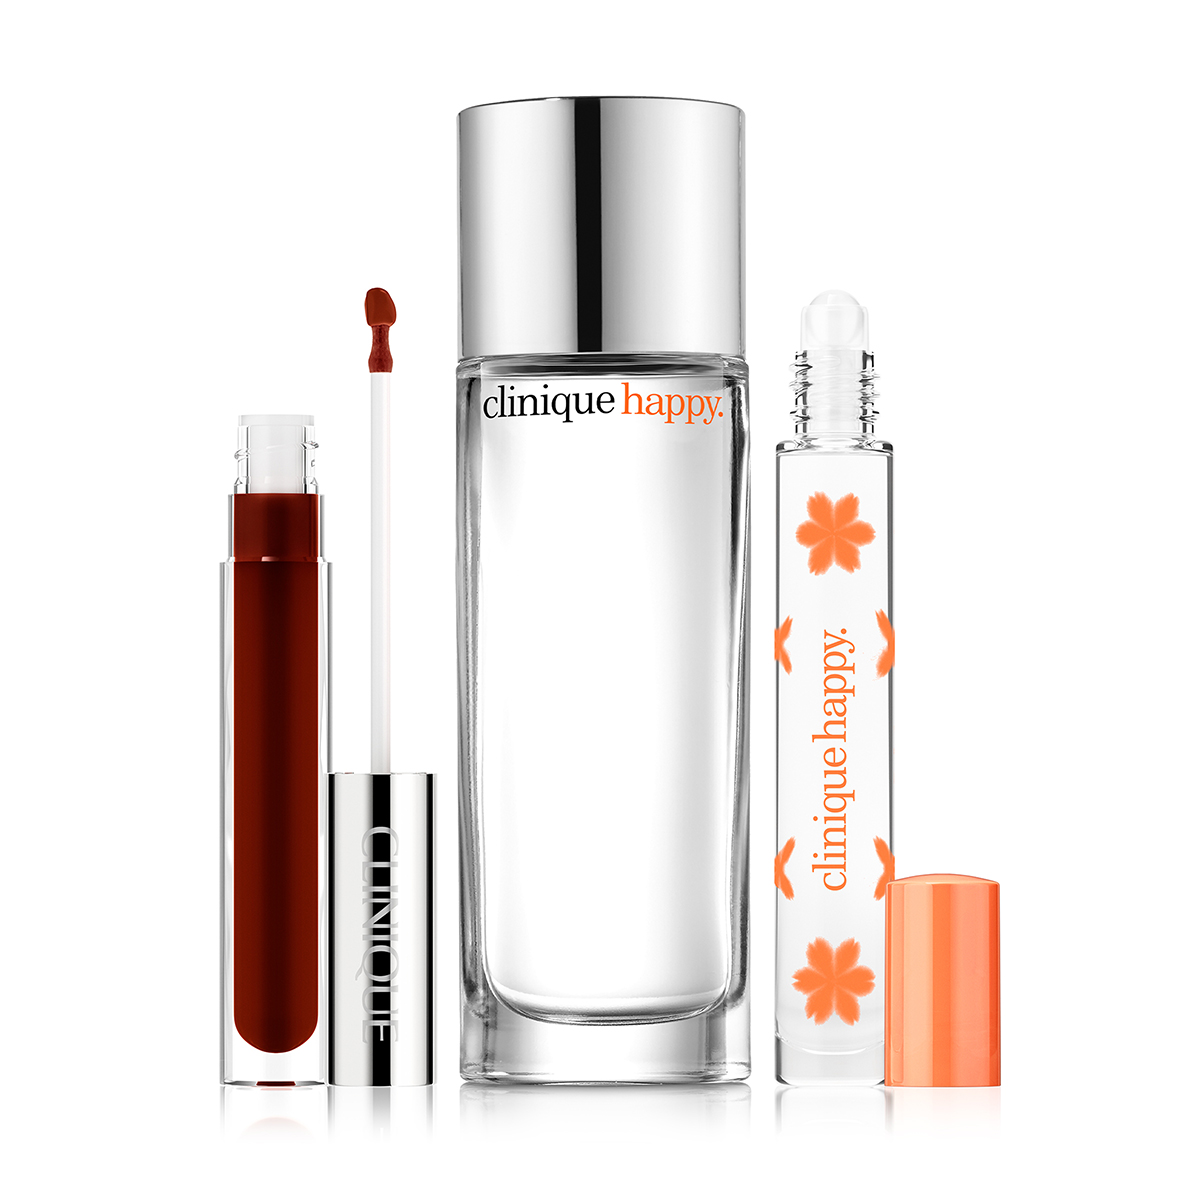 Clinique Perfectly Happy(tm) Fragrance + Lip Gloss Set - $125 Value